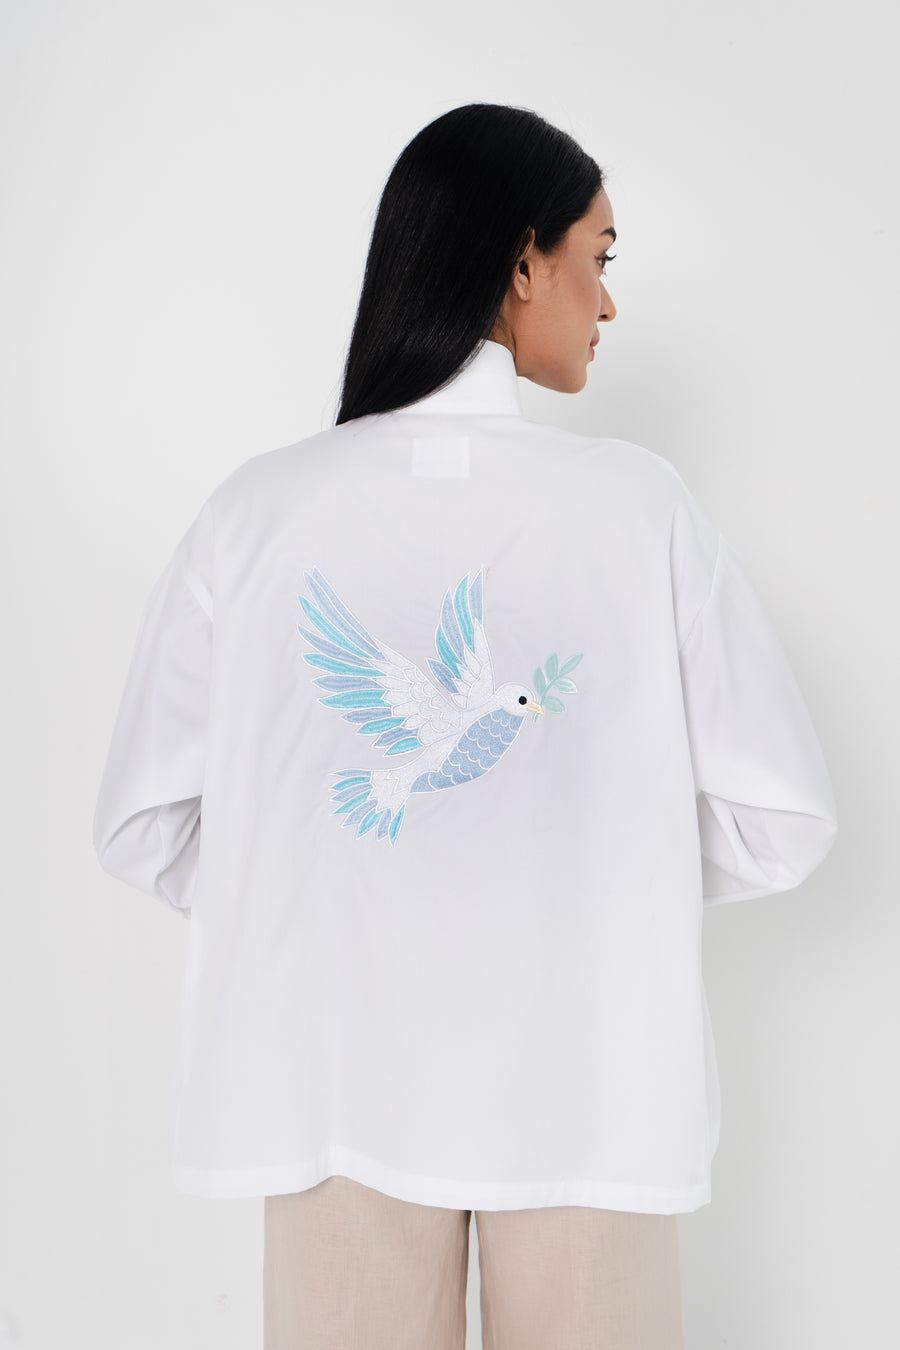 Ta-noura for Palestine: Rouh al Rouh Embroidered Dove Shirt